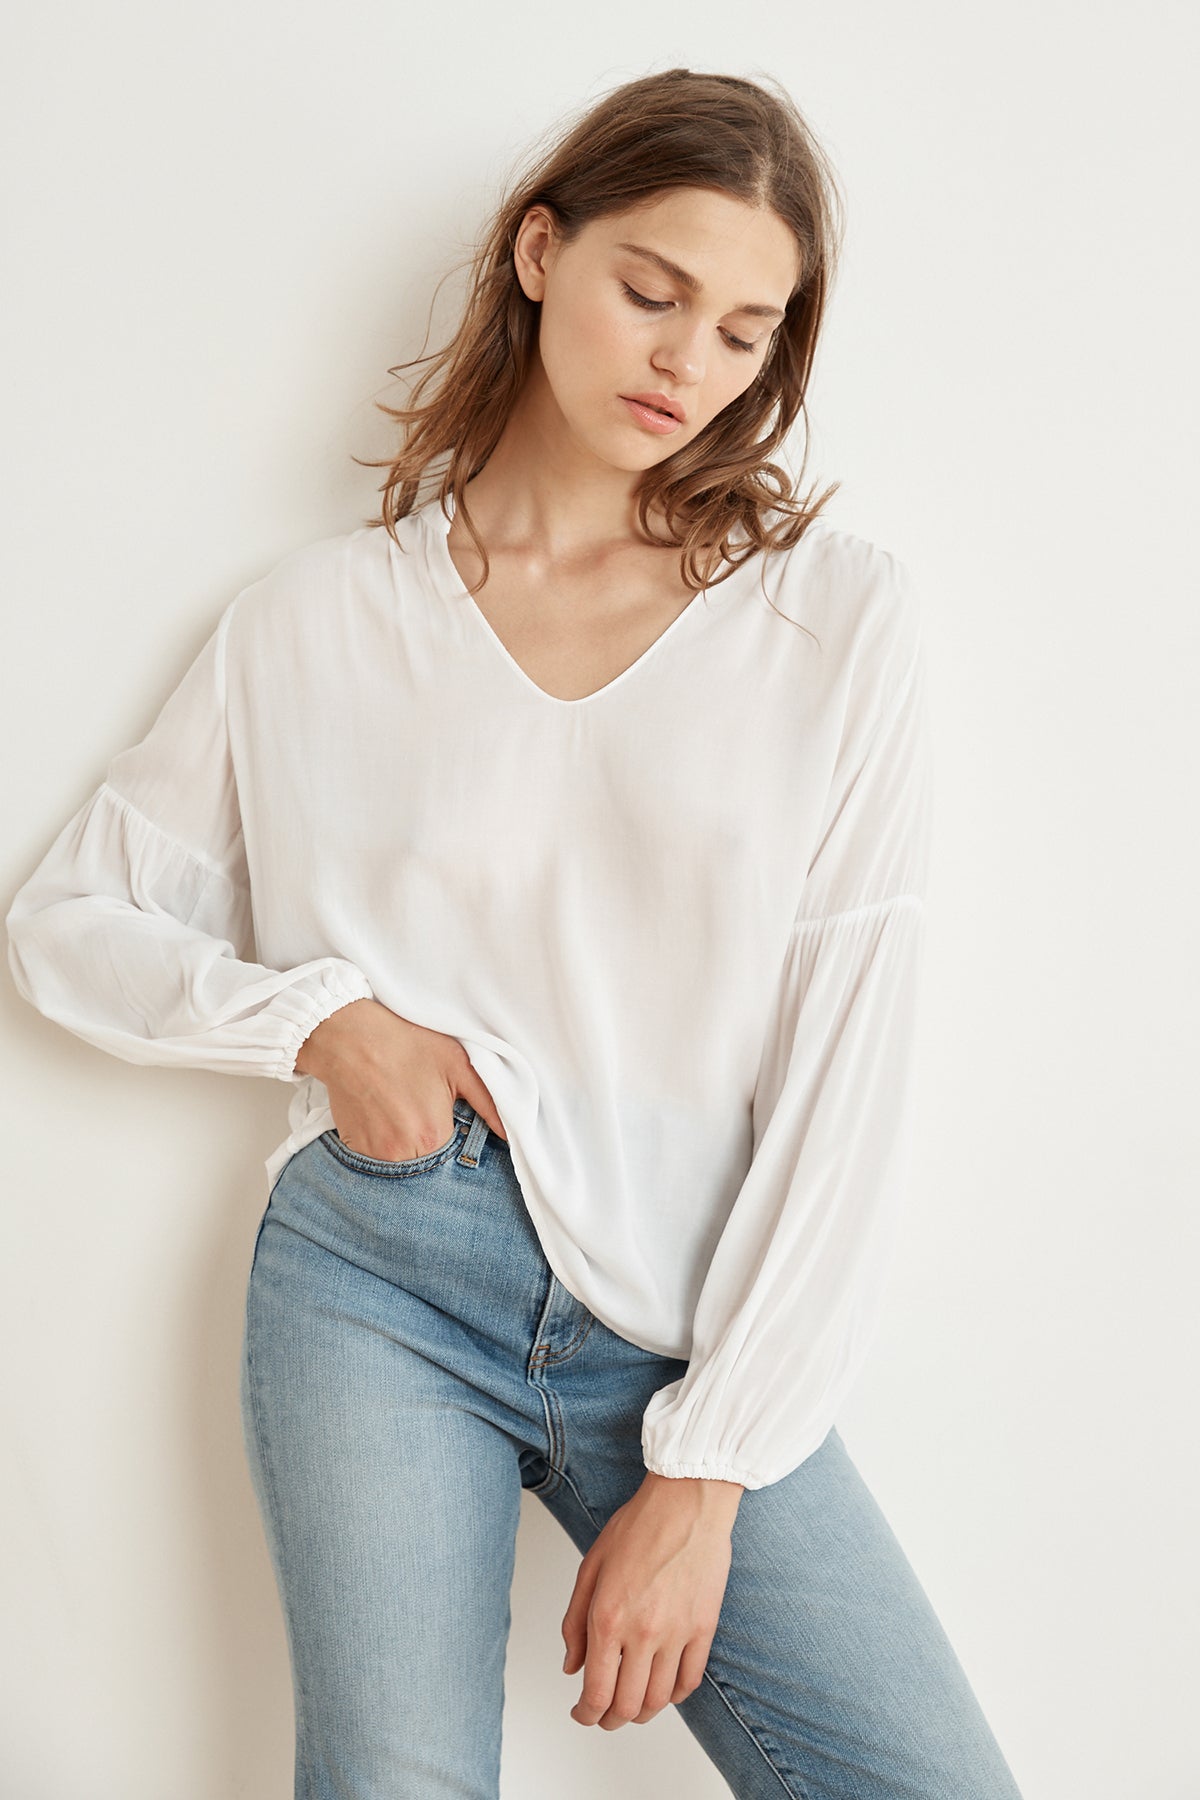 The model is wearing a YULIA RAYON CHALLIS PEASANT SLEEVE BLOUSE by Velvet by Graham & Spencer.-1147602632785